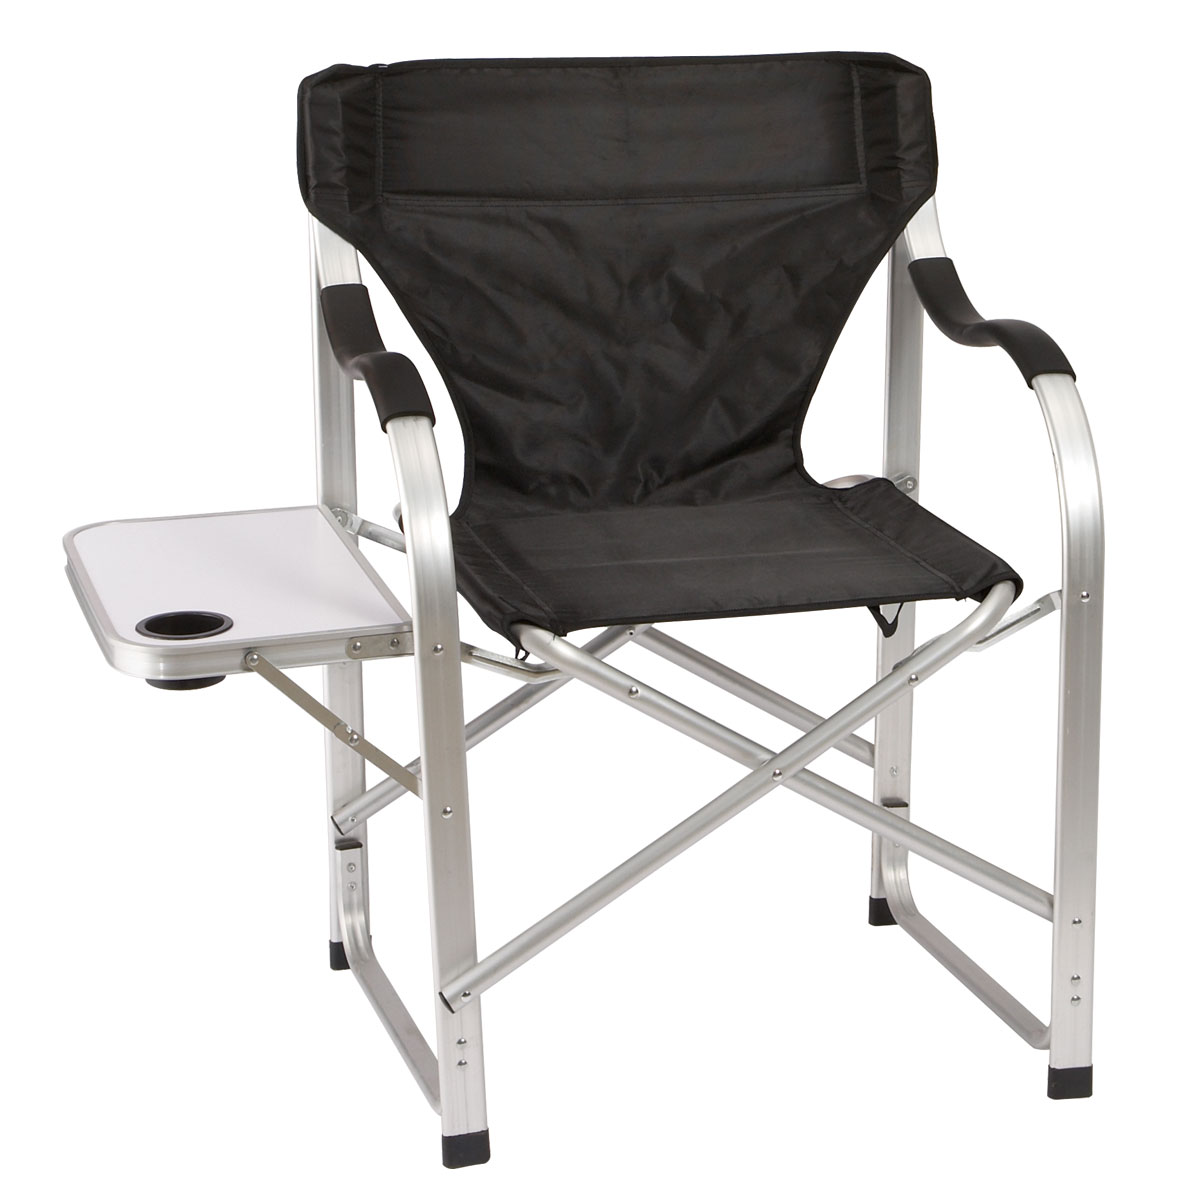 Factors to consider before buying the folding lawn chairs ...